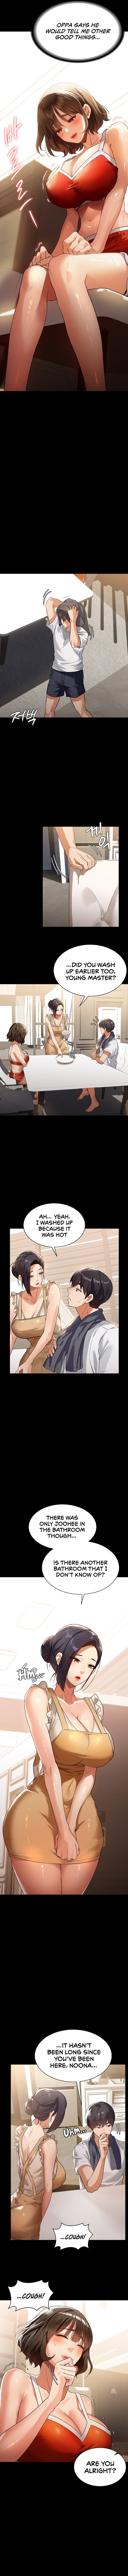 young-housemaid-chap-4-6